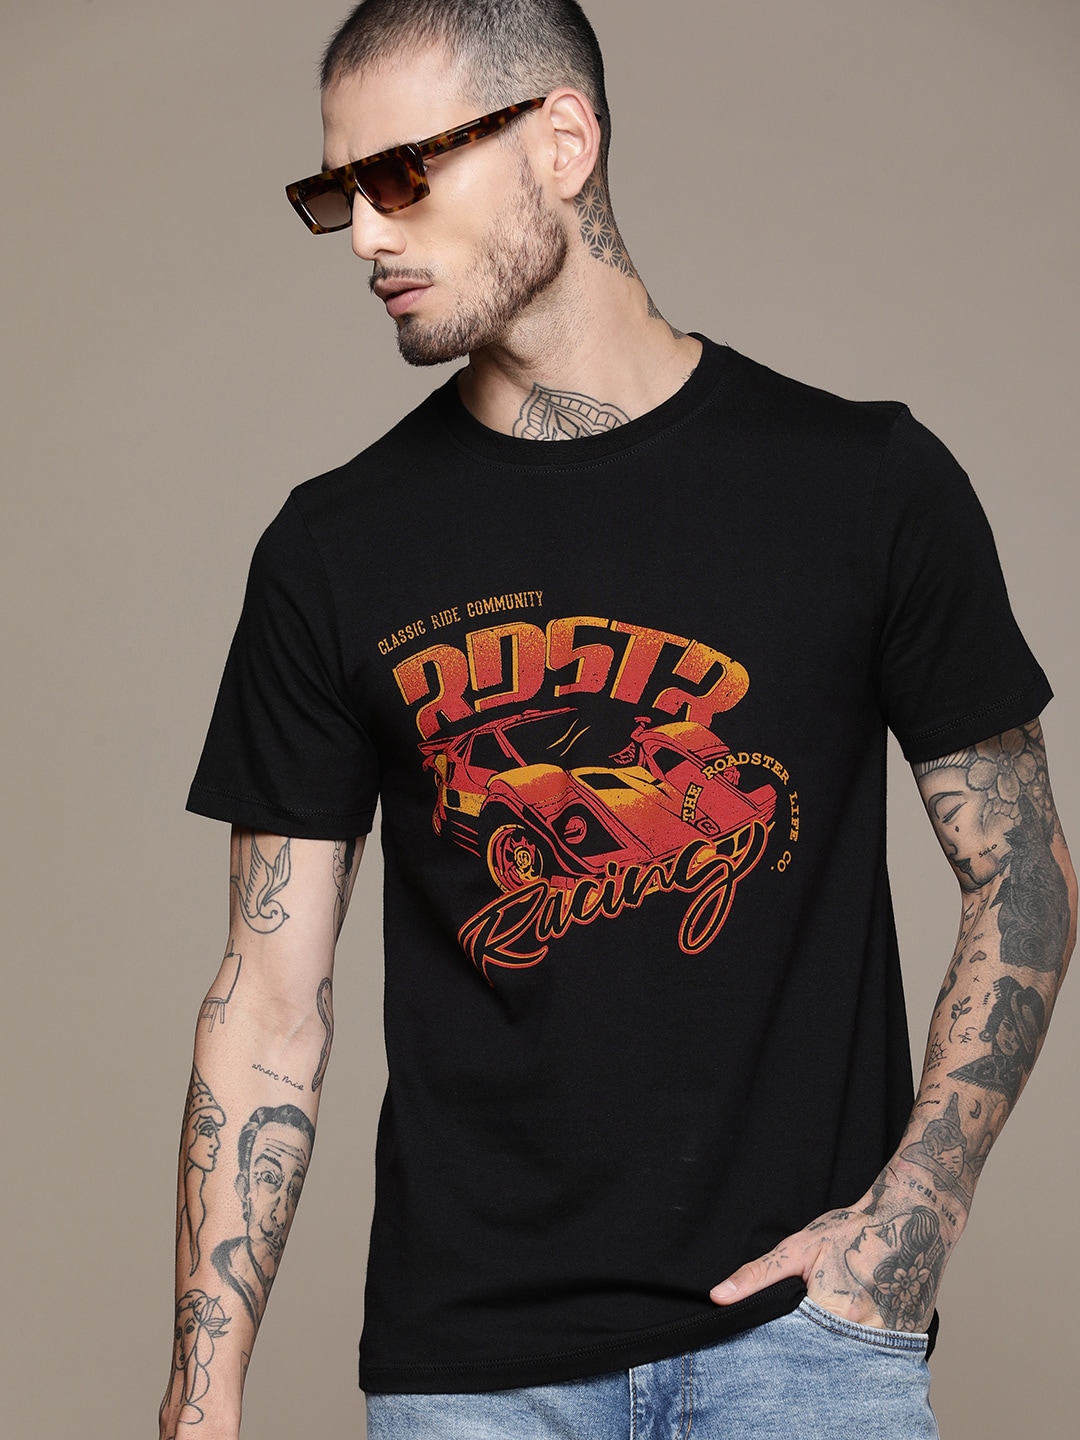 The Roadster Life Co. Pure Cotton Graphic Printed Casual T-shirt